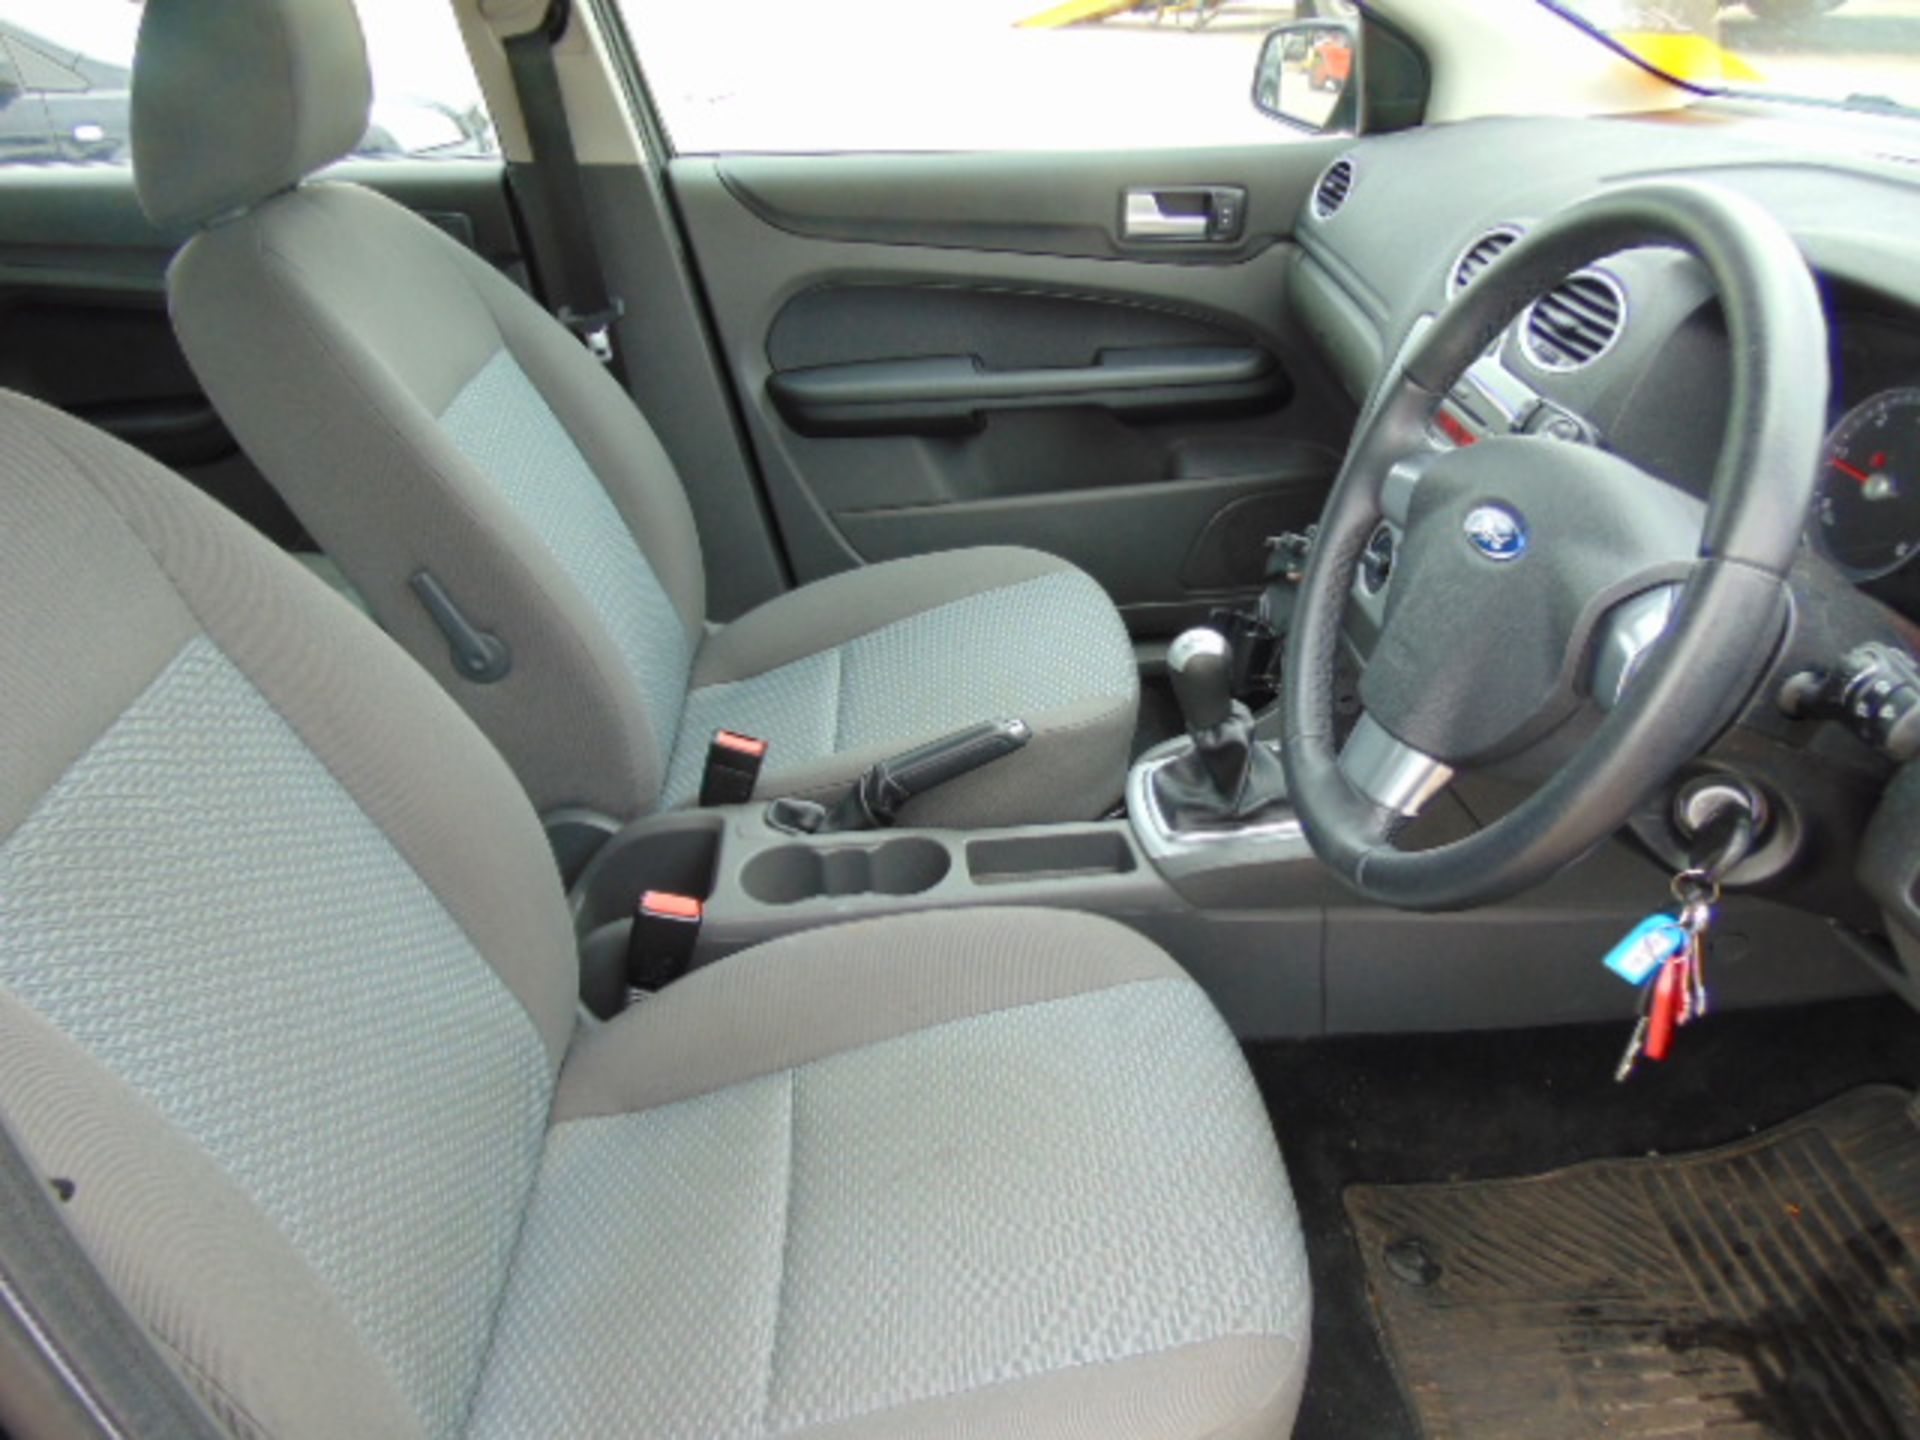 2008 Ford Focus 1.8 TDCI Style Hatchback - Image 14 of 18